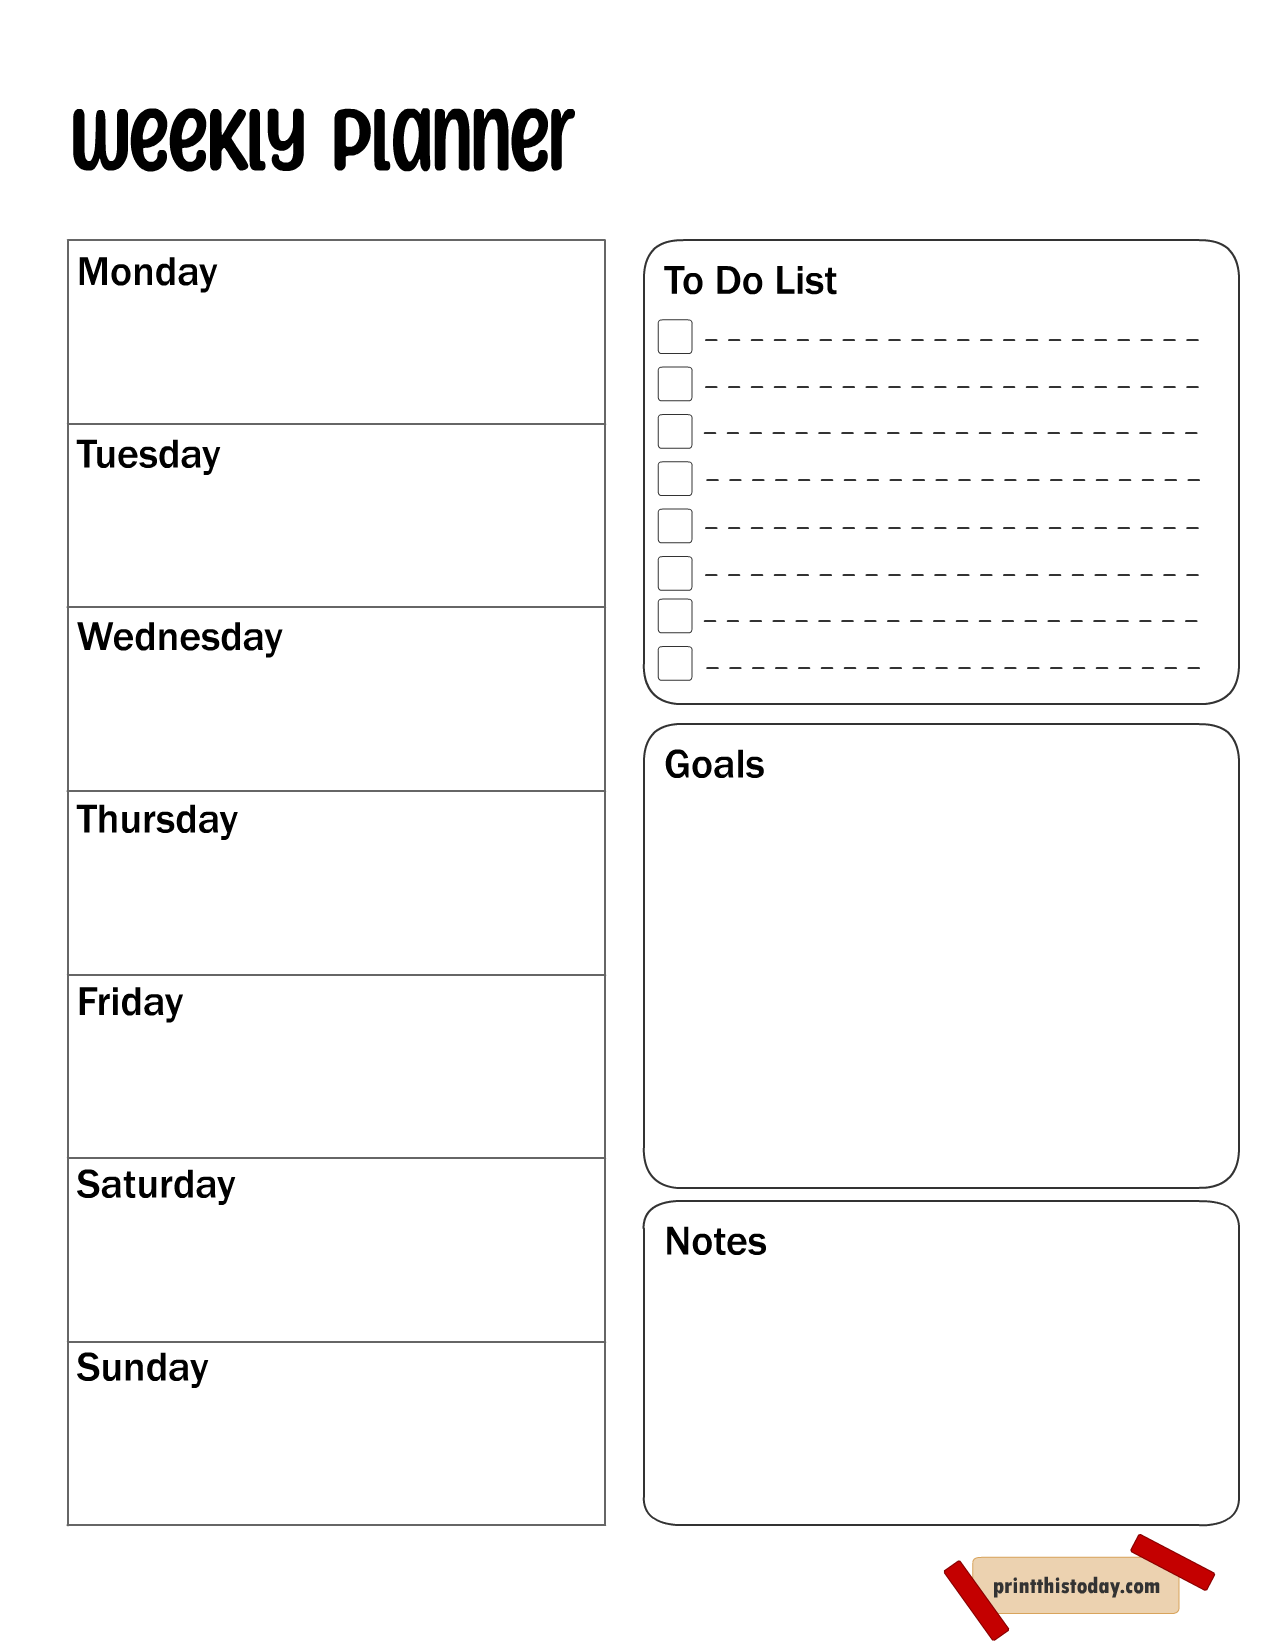 Free Printable Weekley Planner Template (Black and White)